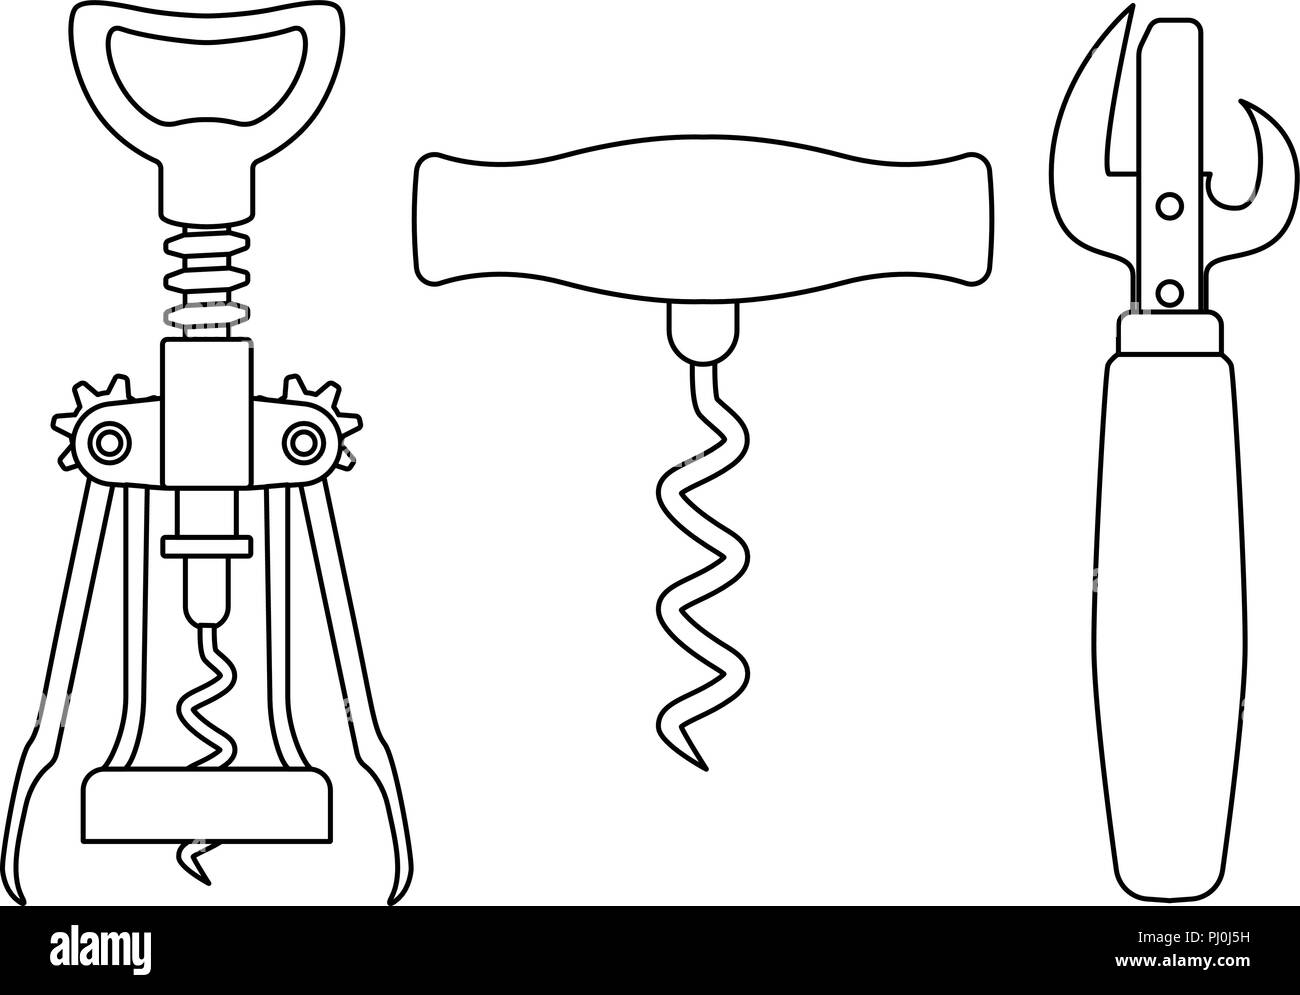 Corkscrews and can opener. Outline drawing Stock Vector